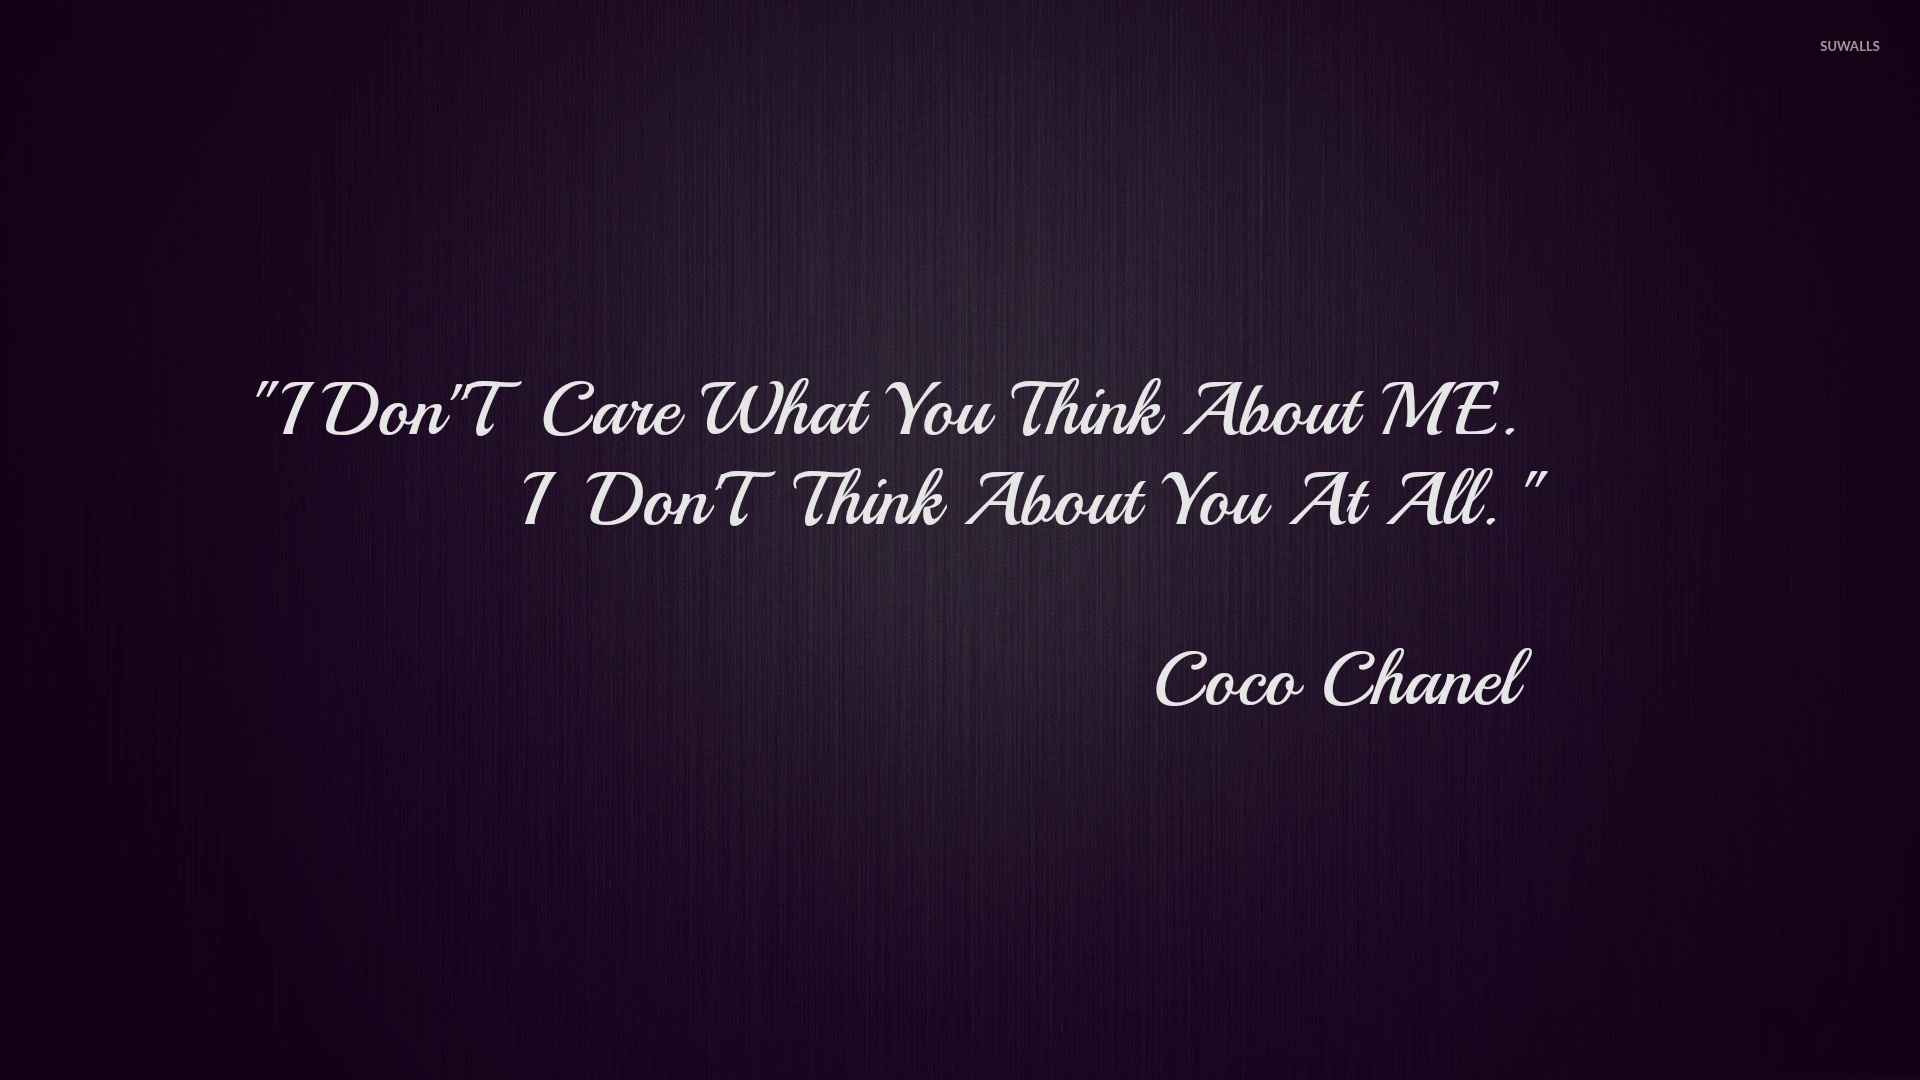 I don't care what you think about me jpg 1920x1080. 